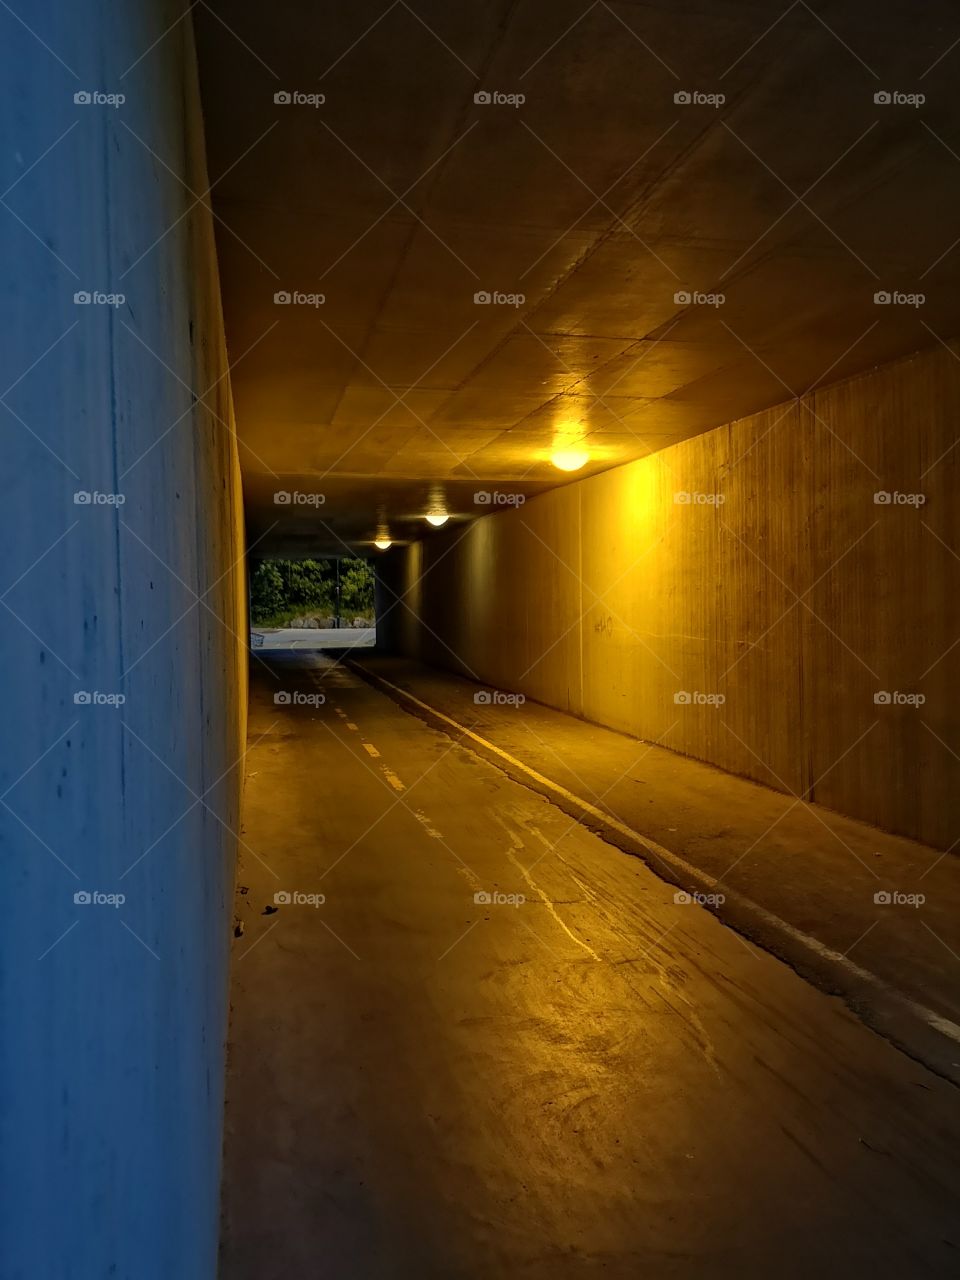 A nice underpass from my midnight walk